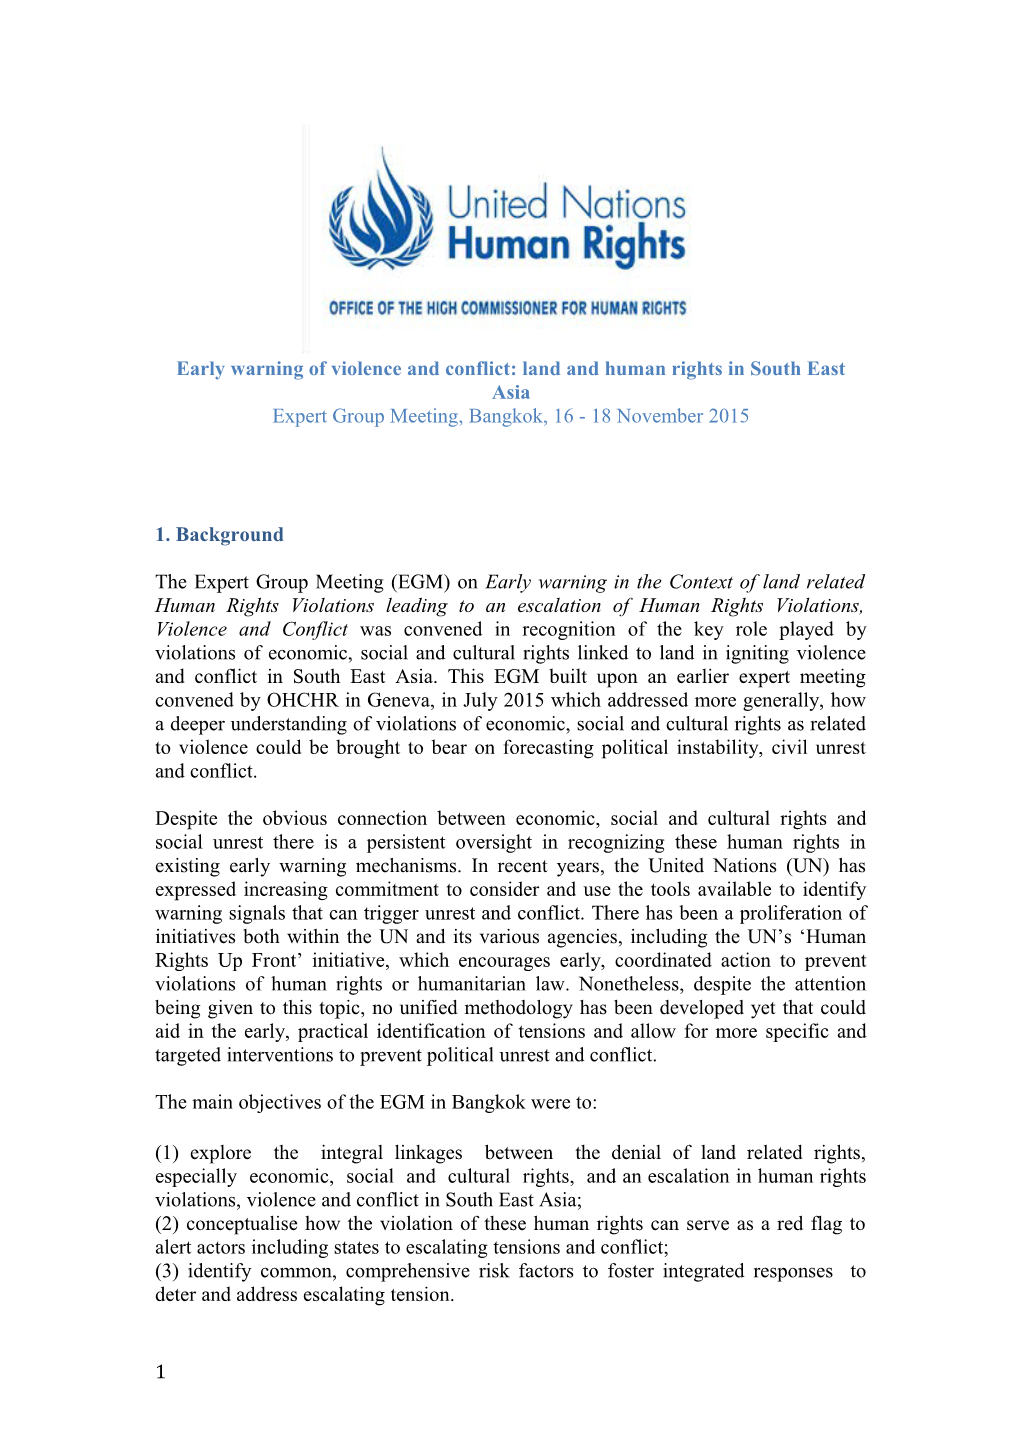 Early Warning of Violence and Conflict: Land and Human Rights in South East Asia